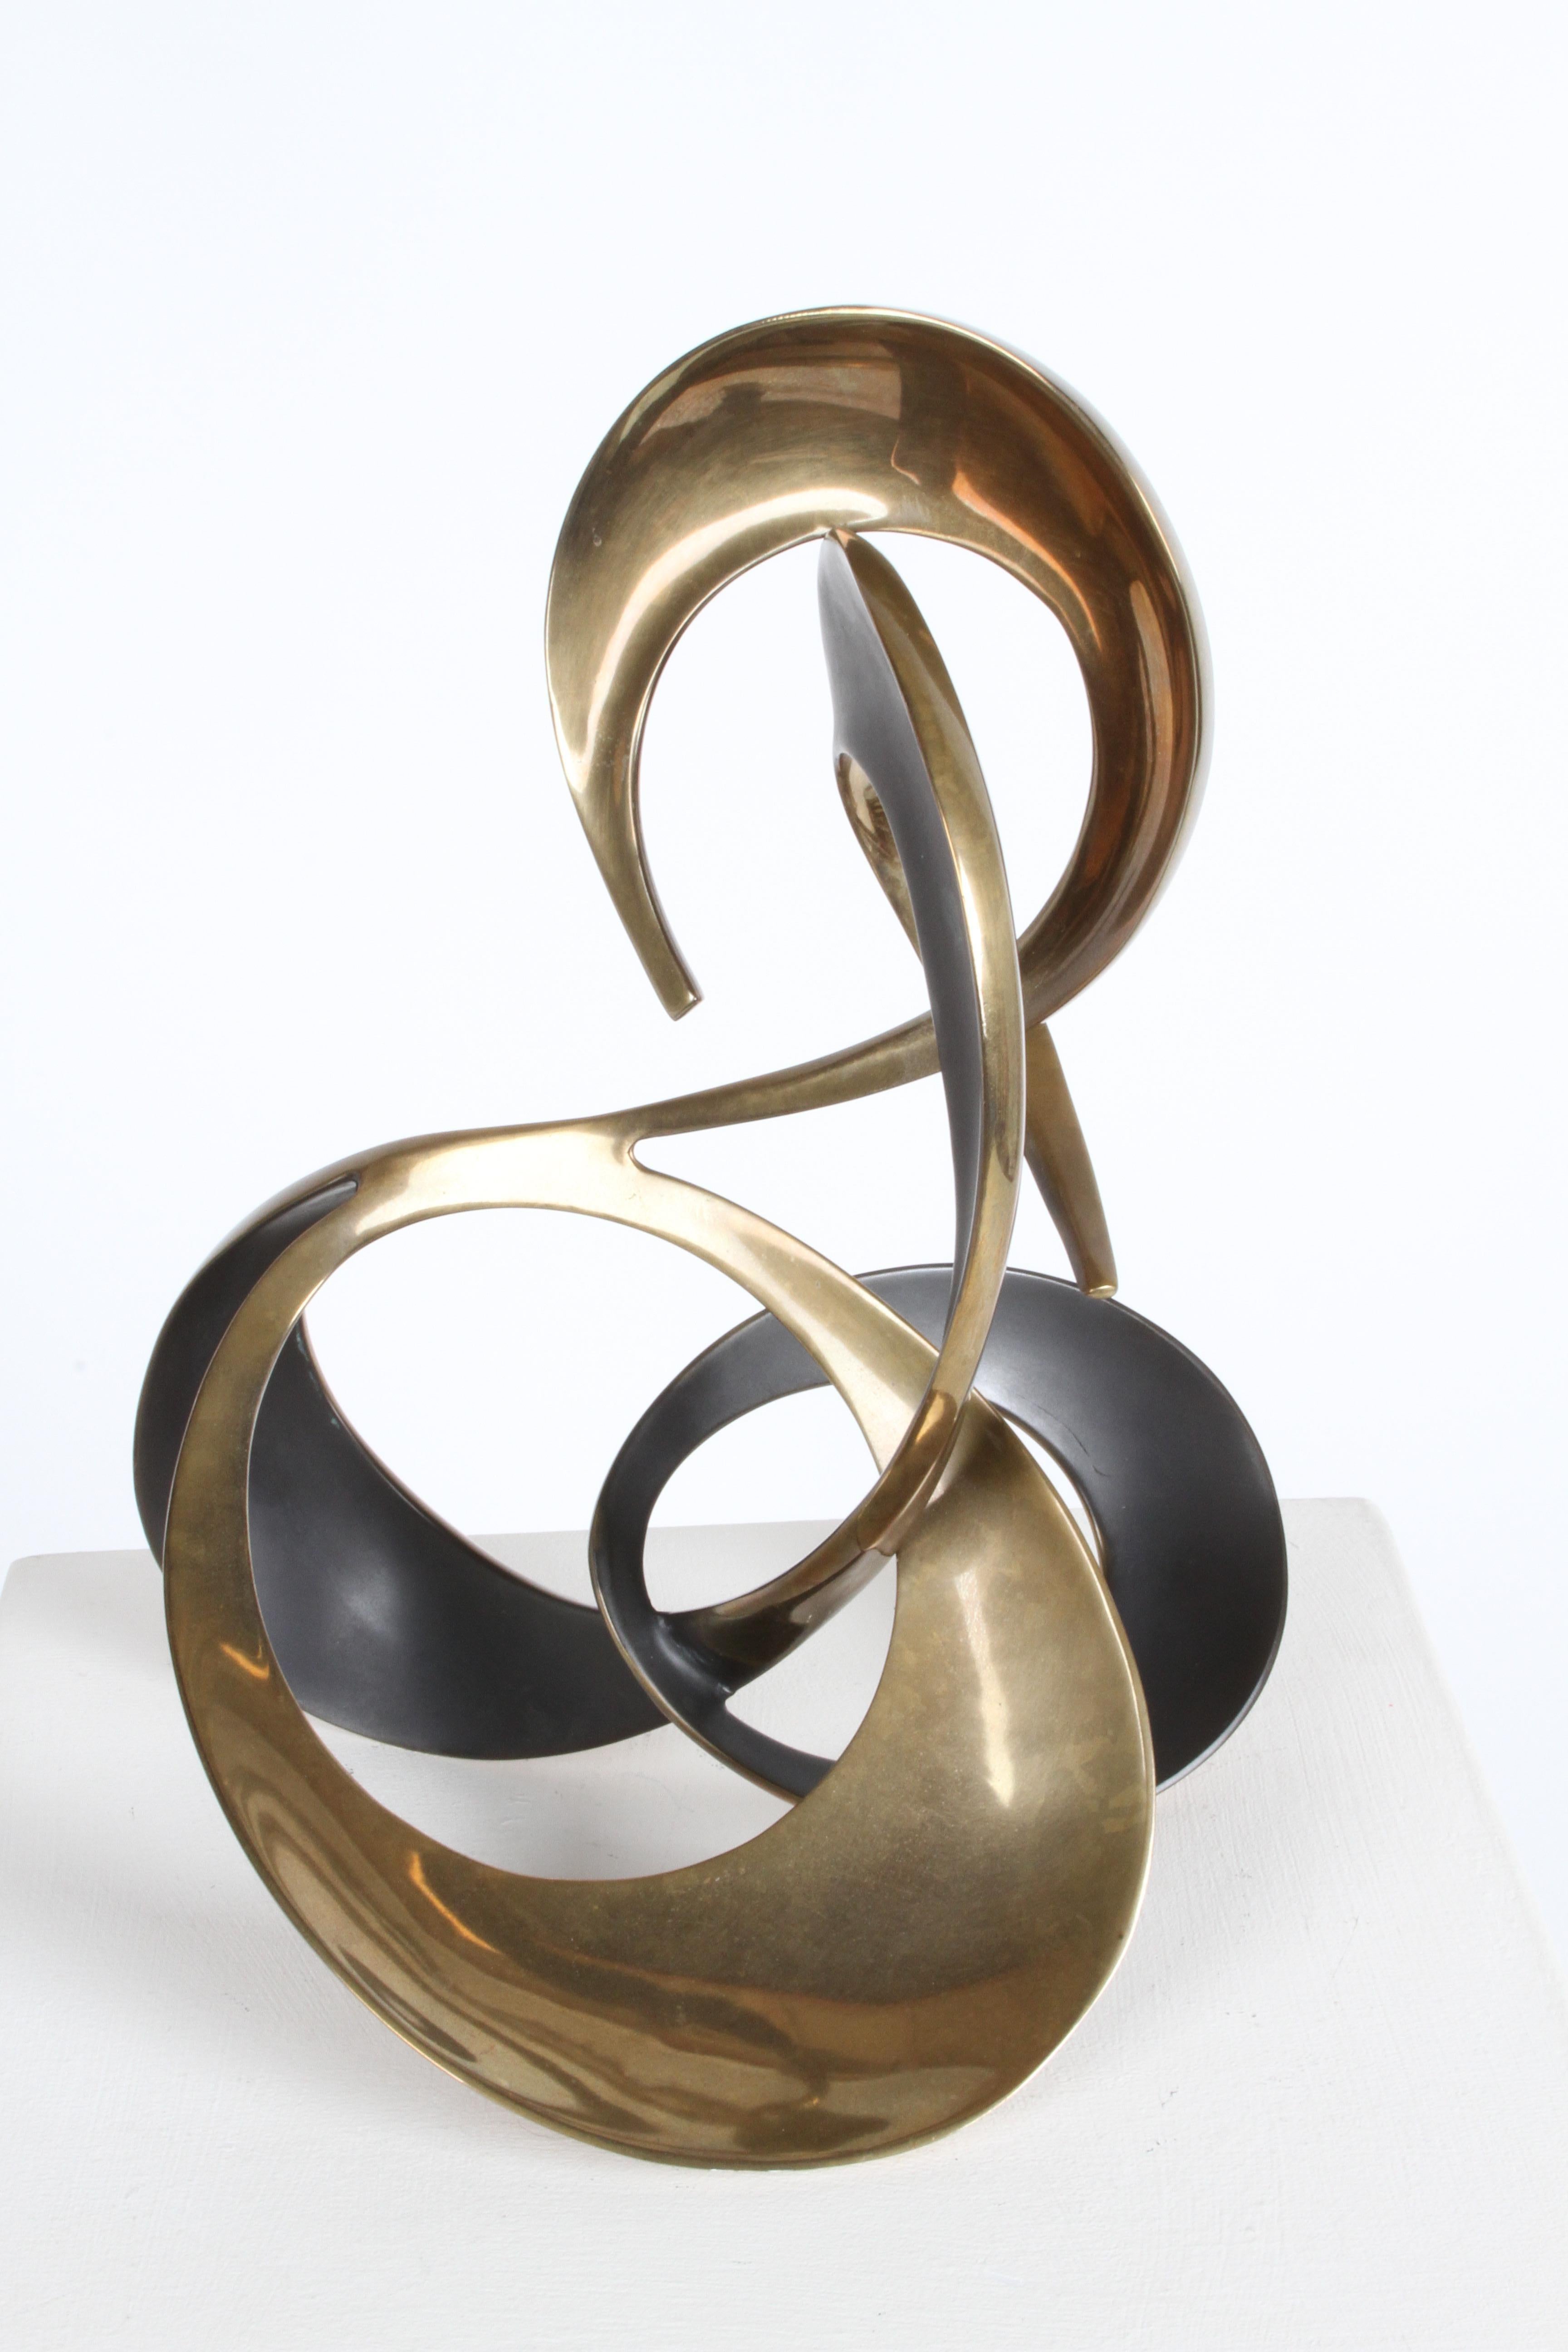 1980s bronze abstract sculpture by California artist Bob Bennett (1939-2003). This is number 80/100 and is signed and dated 1989. Some of the sculptures ribbon forms, have been oxidized for a contrast by the artist. 
Over all in fine condition.